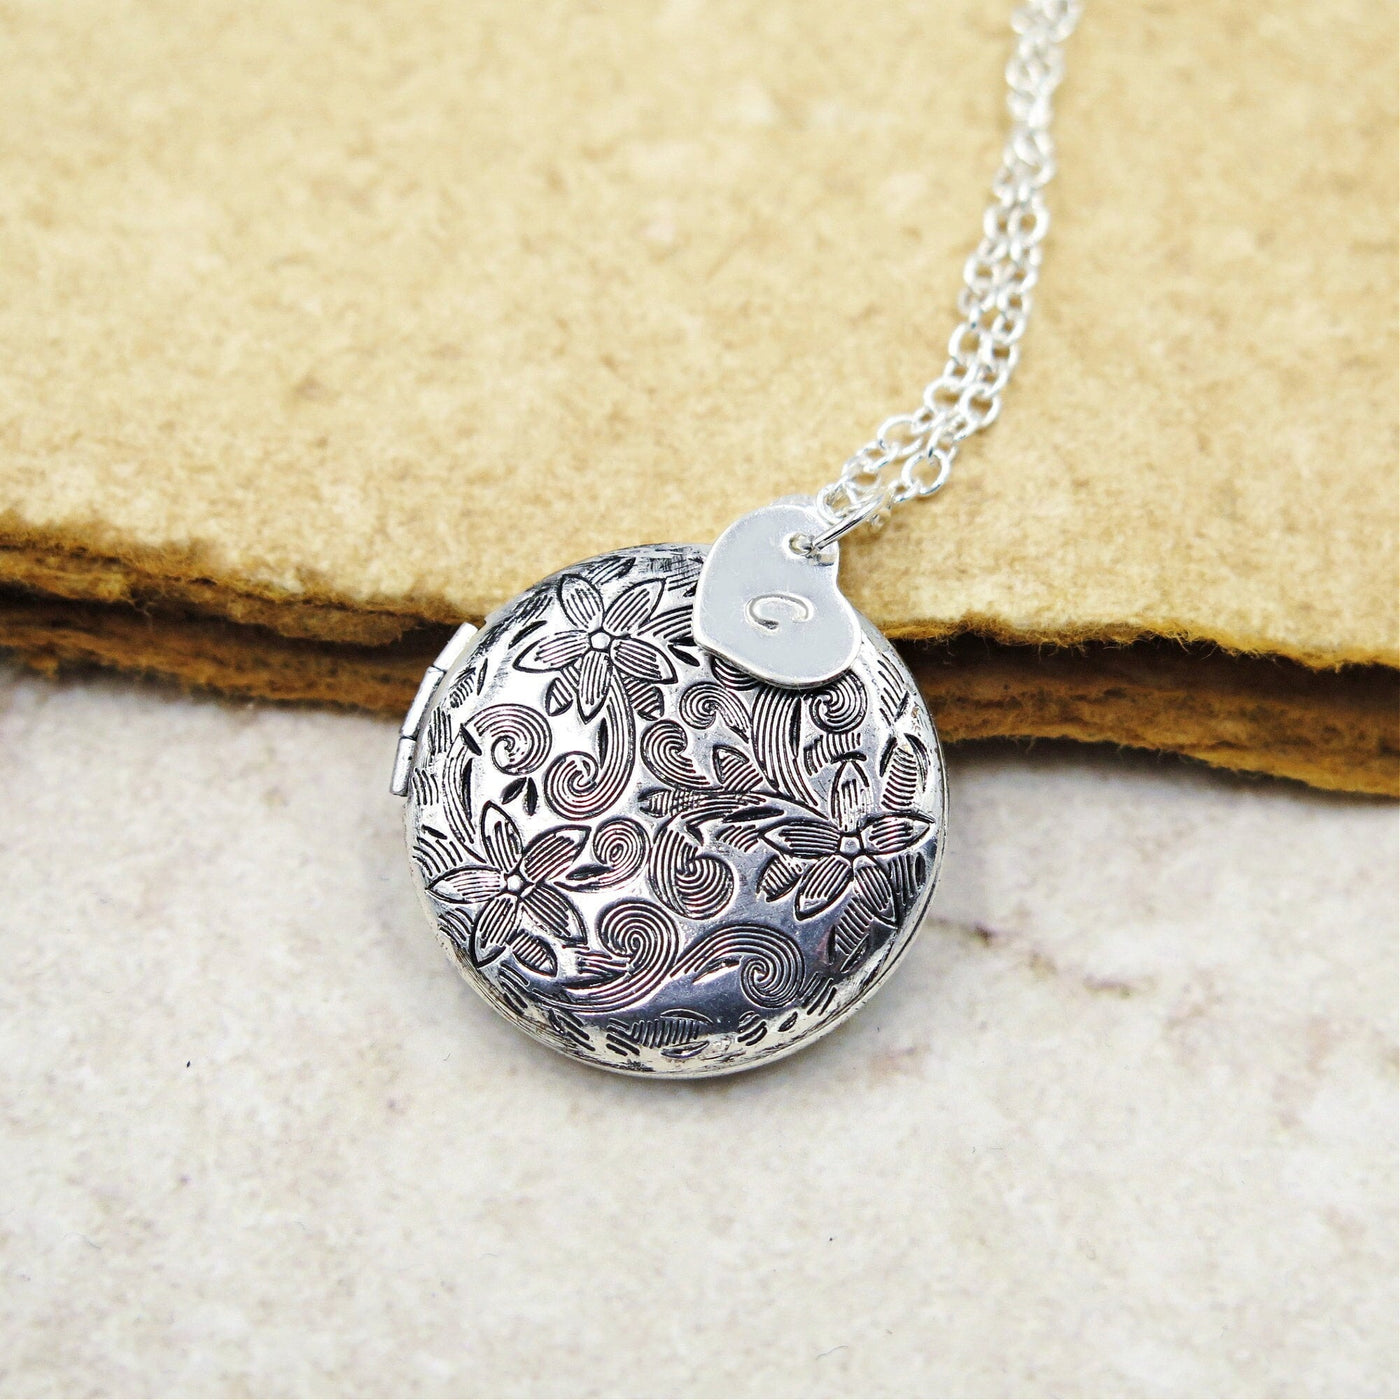 Antiqued Silver Floral Locket with Personalized Charm and Photos